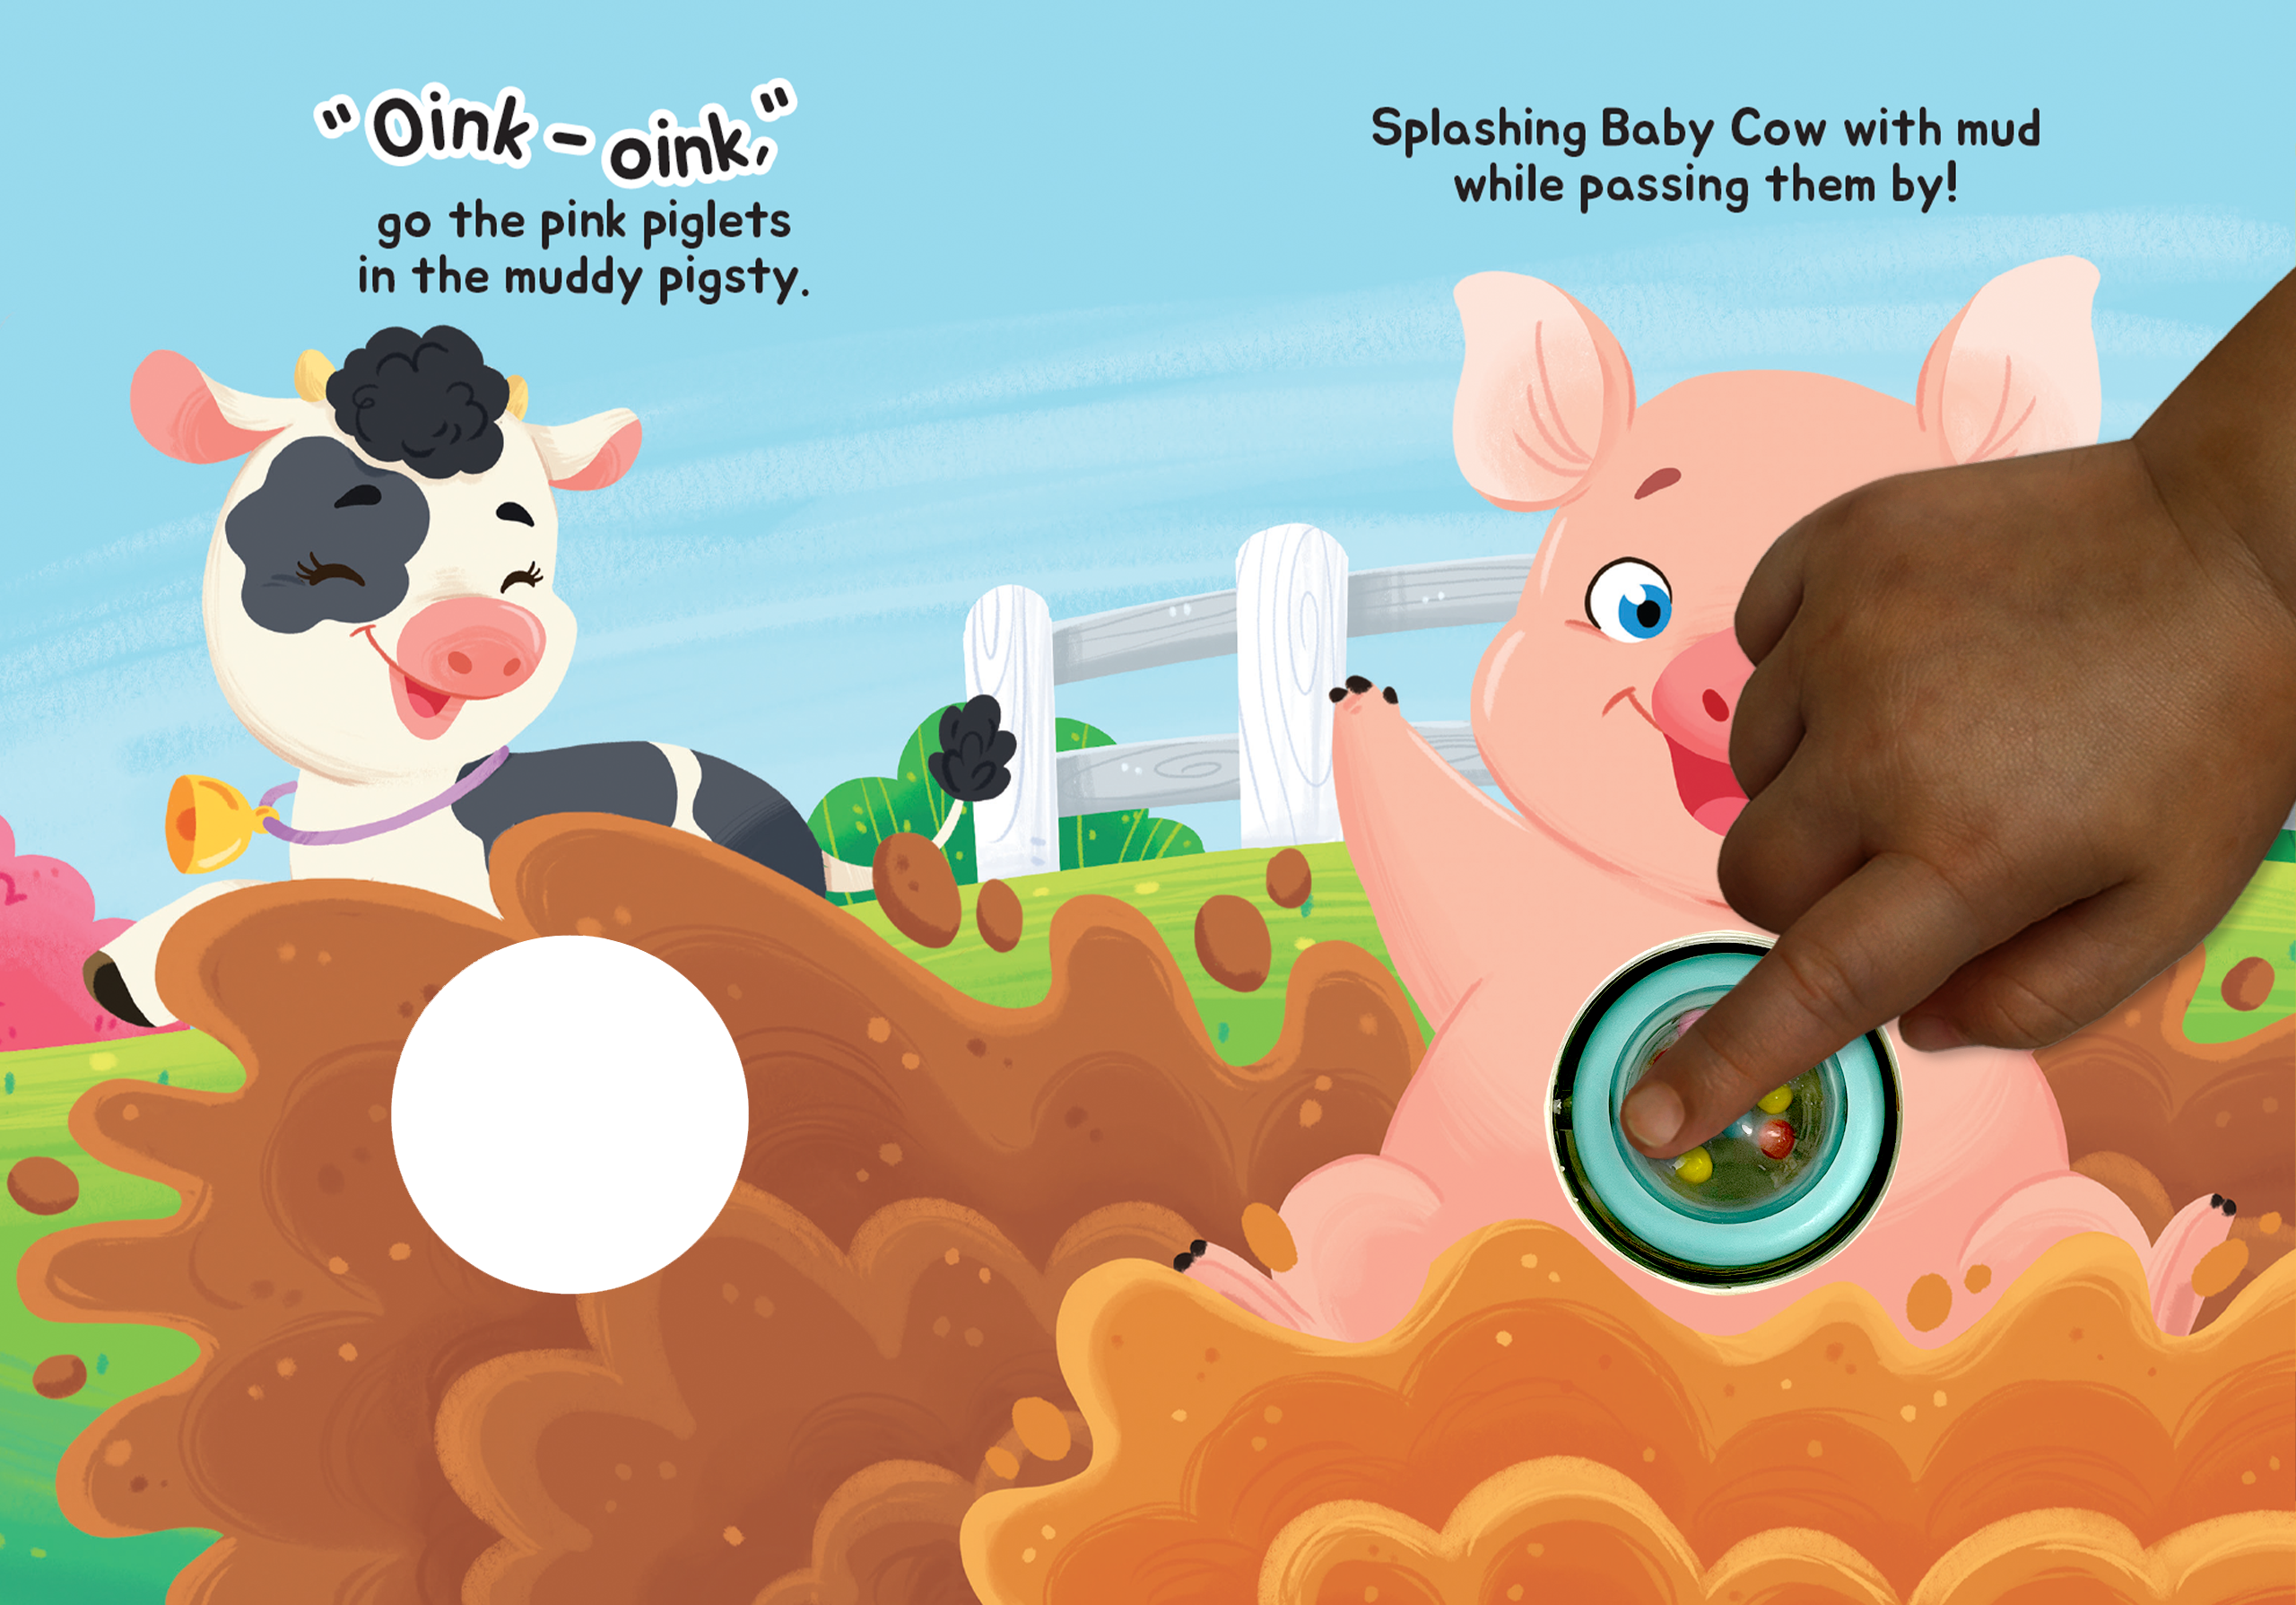 Little Hippo Books - Baby Barnyard - Children's Rattle and Read Interactive Sensory Board Book with Spinning Rattle